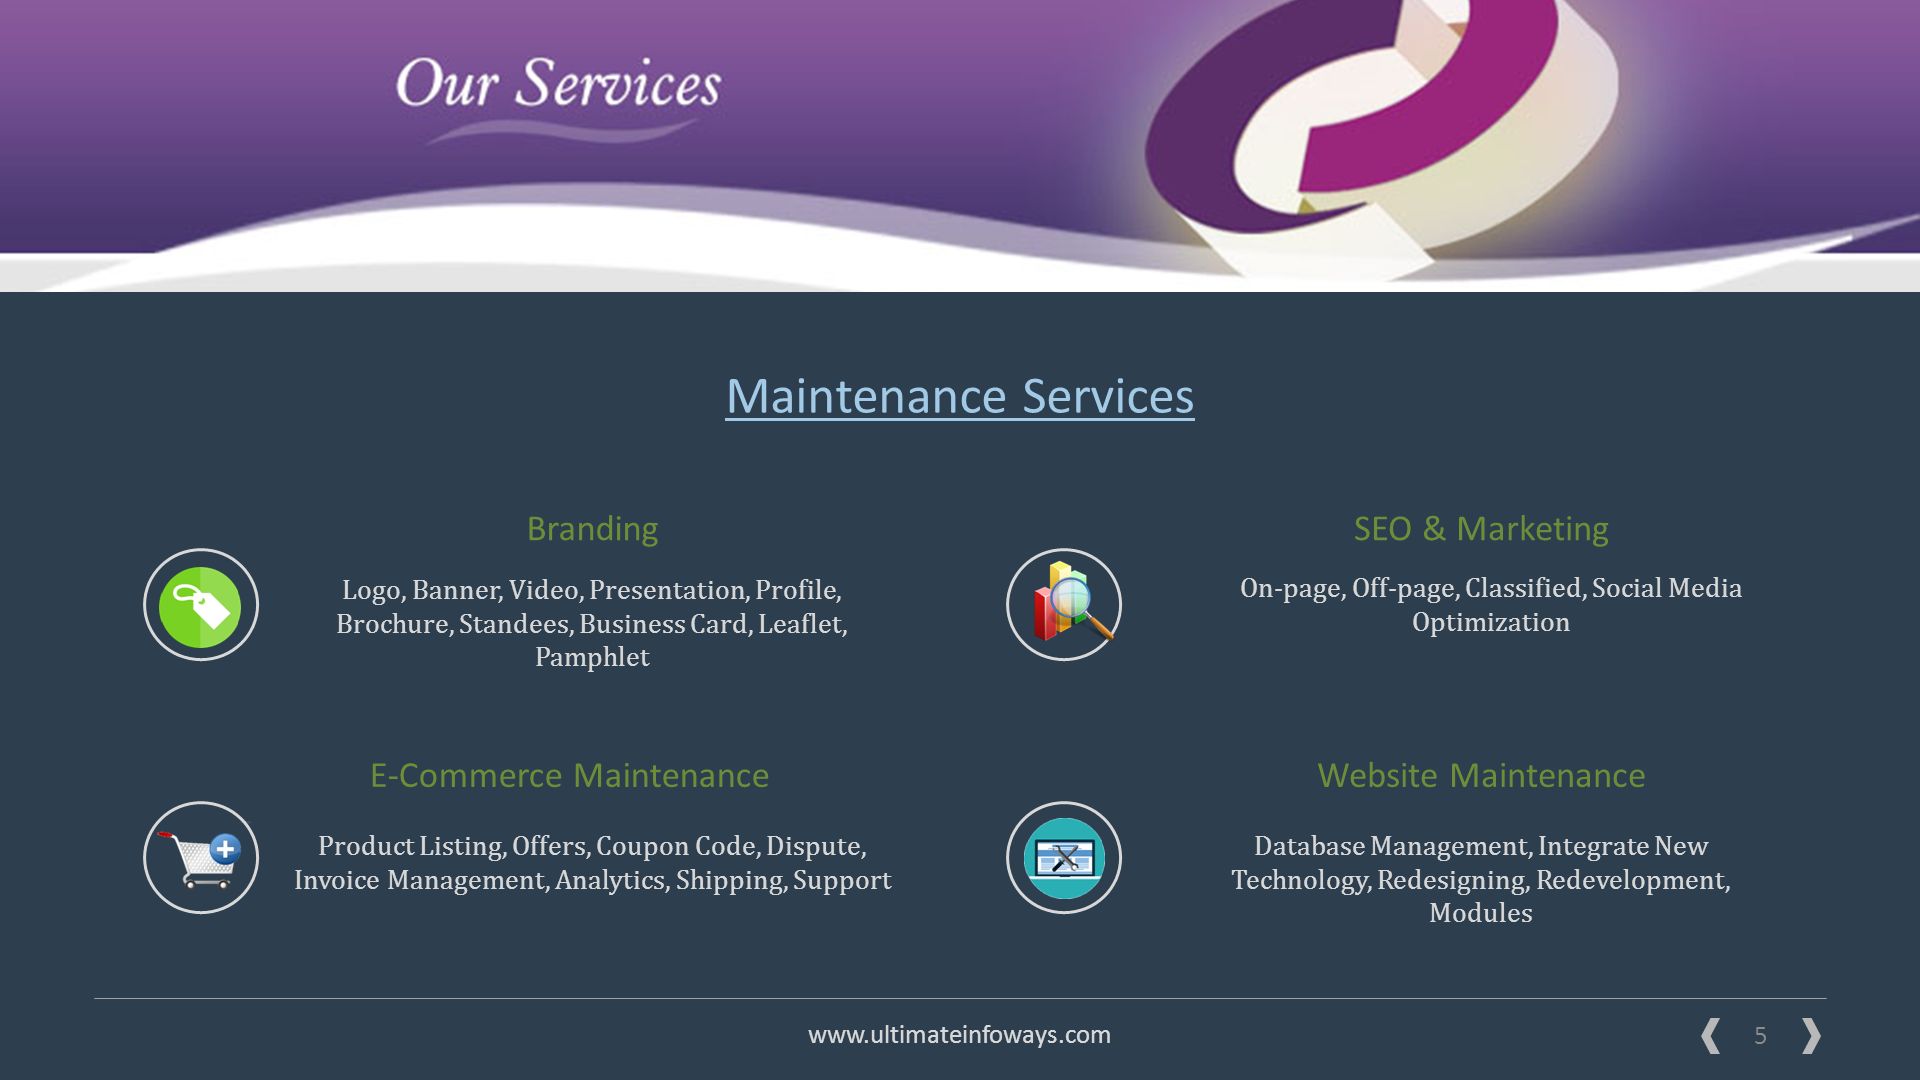 5 Solutions     Maintenance Services BrandingSEO & Marketing E-Commerce MaintenanceWebsite Maintenance Logo, Banner, Video, Presentation, Profile, Brochure, Standees, Business Card, Leaflet, Pamphlet On-page, Off-page, Classified, Social Media Optimization Product Listing, Offers, Coupon Code, Dispute, Invoice Management, Analytics, Shipping, Support Database Management, Integrate New Technology, Redesigning, Redevelopment, Modules